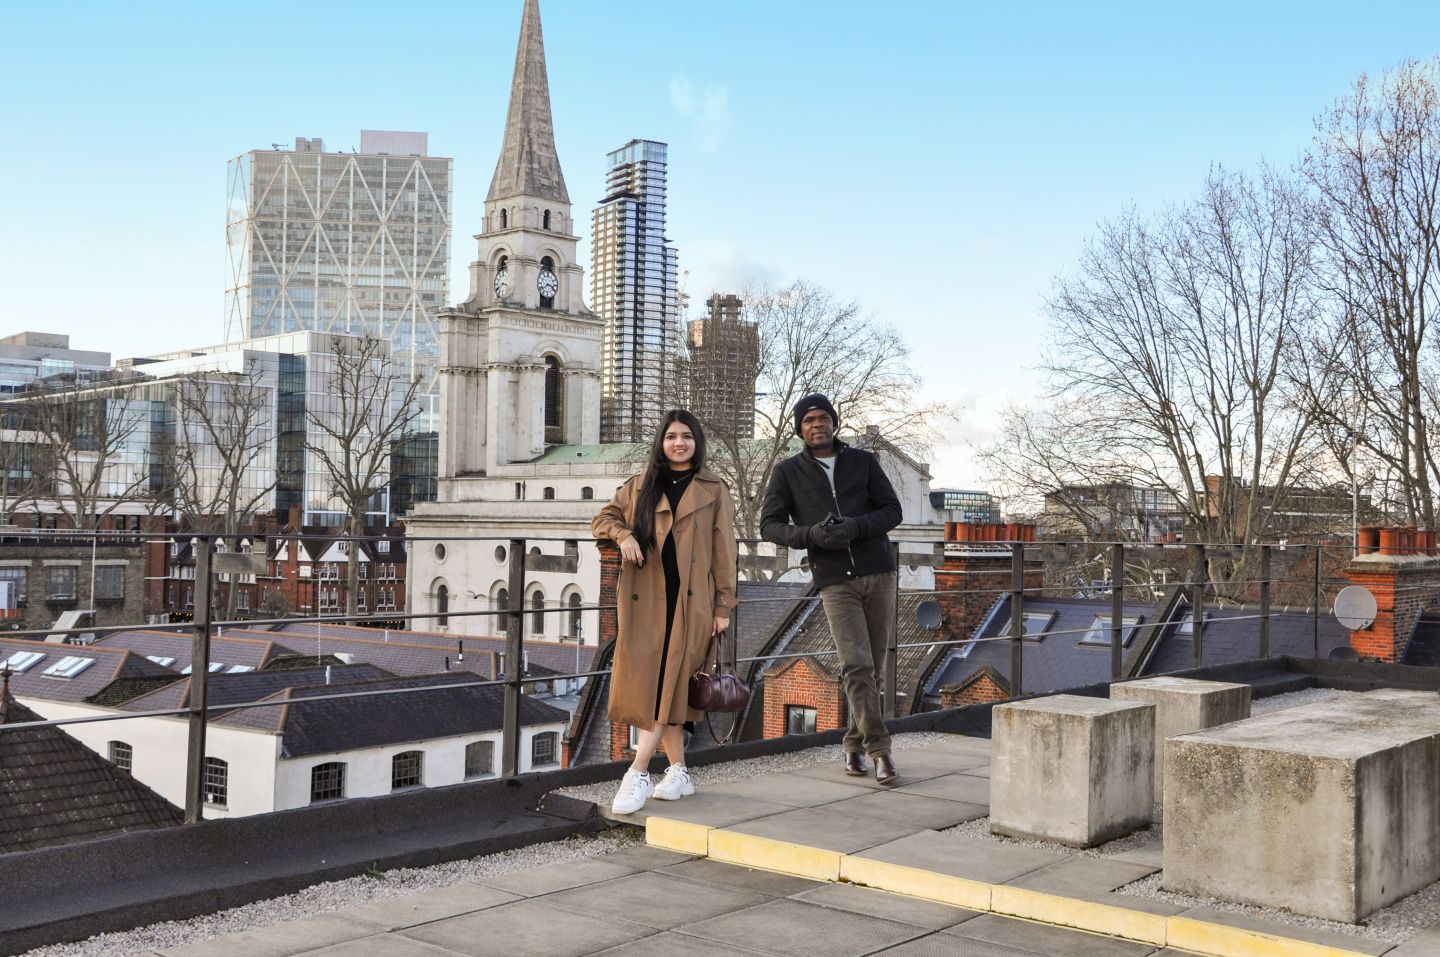 GCU London students on the rooftop on campus, in March 2020